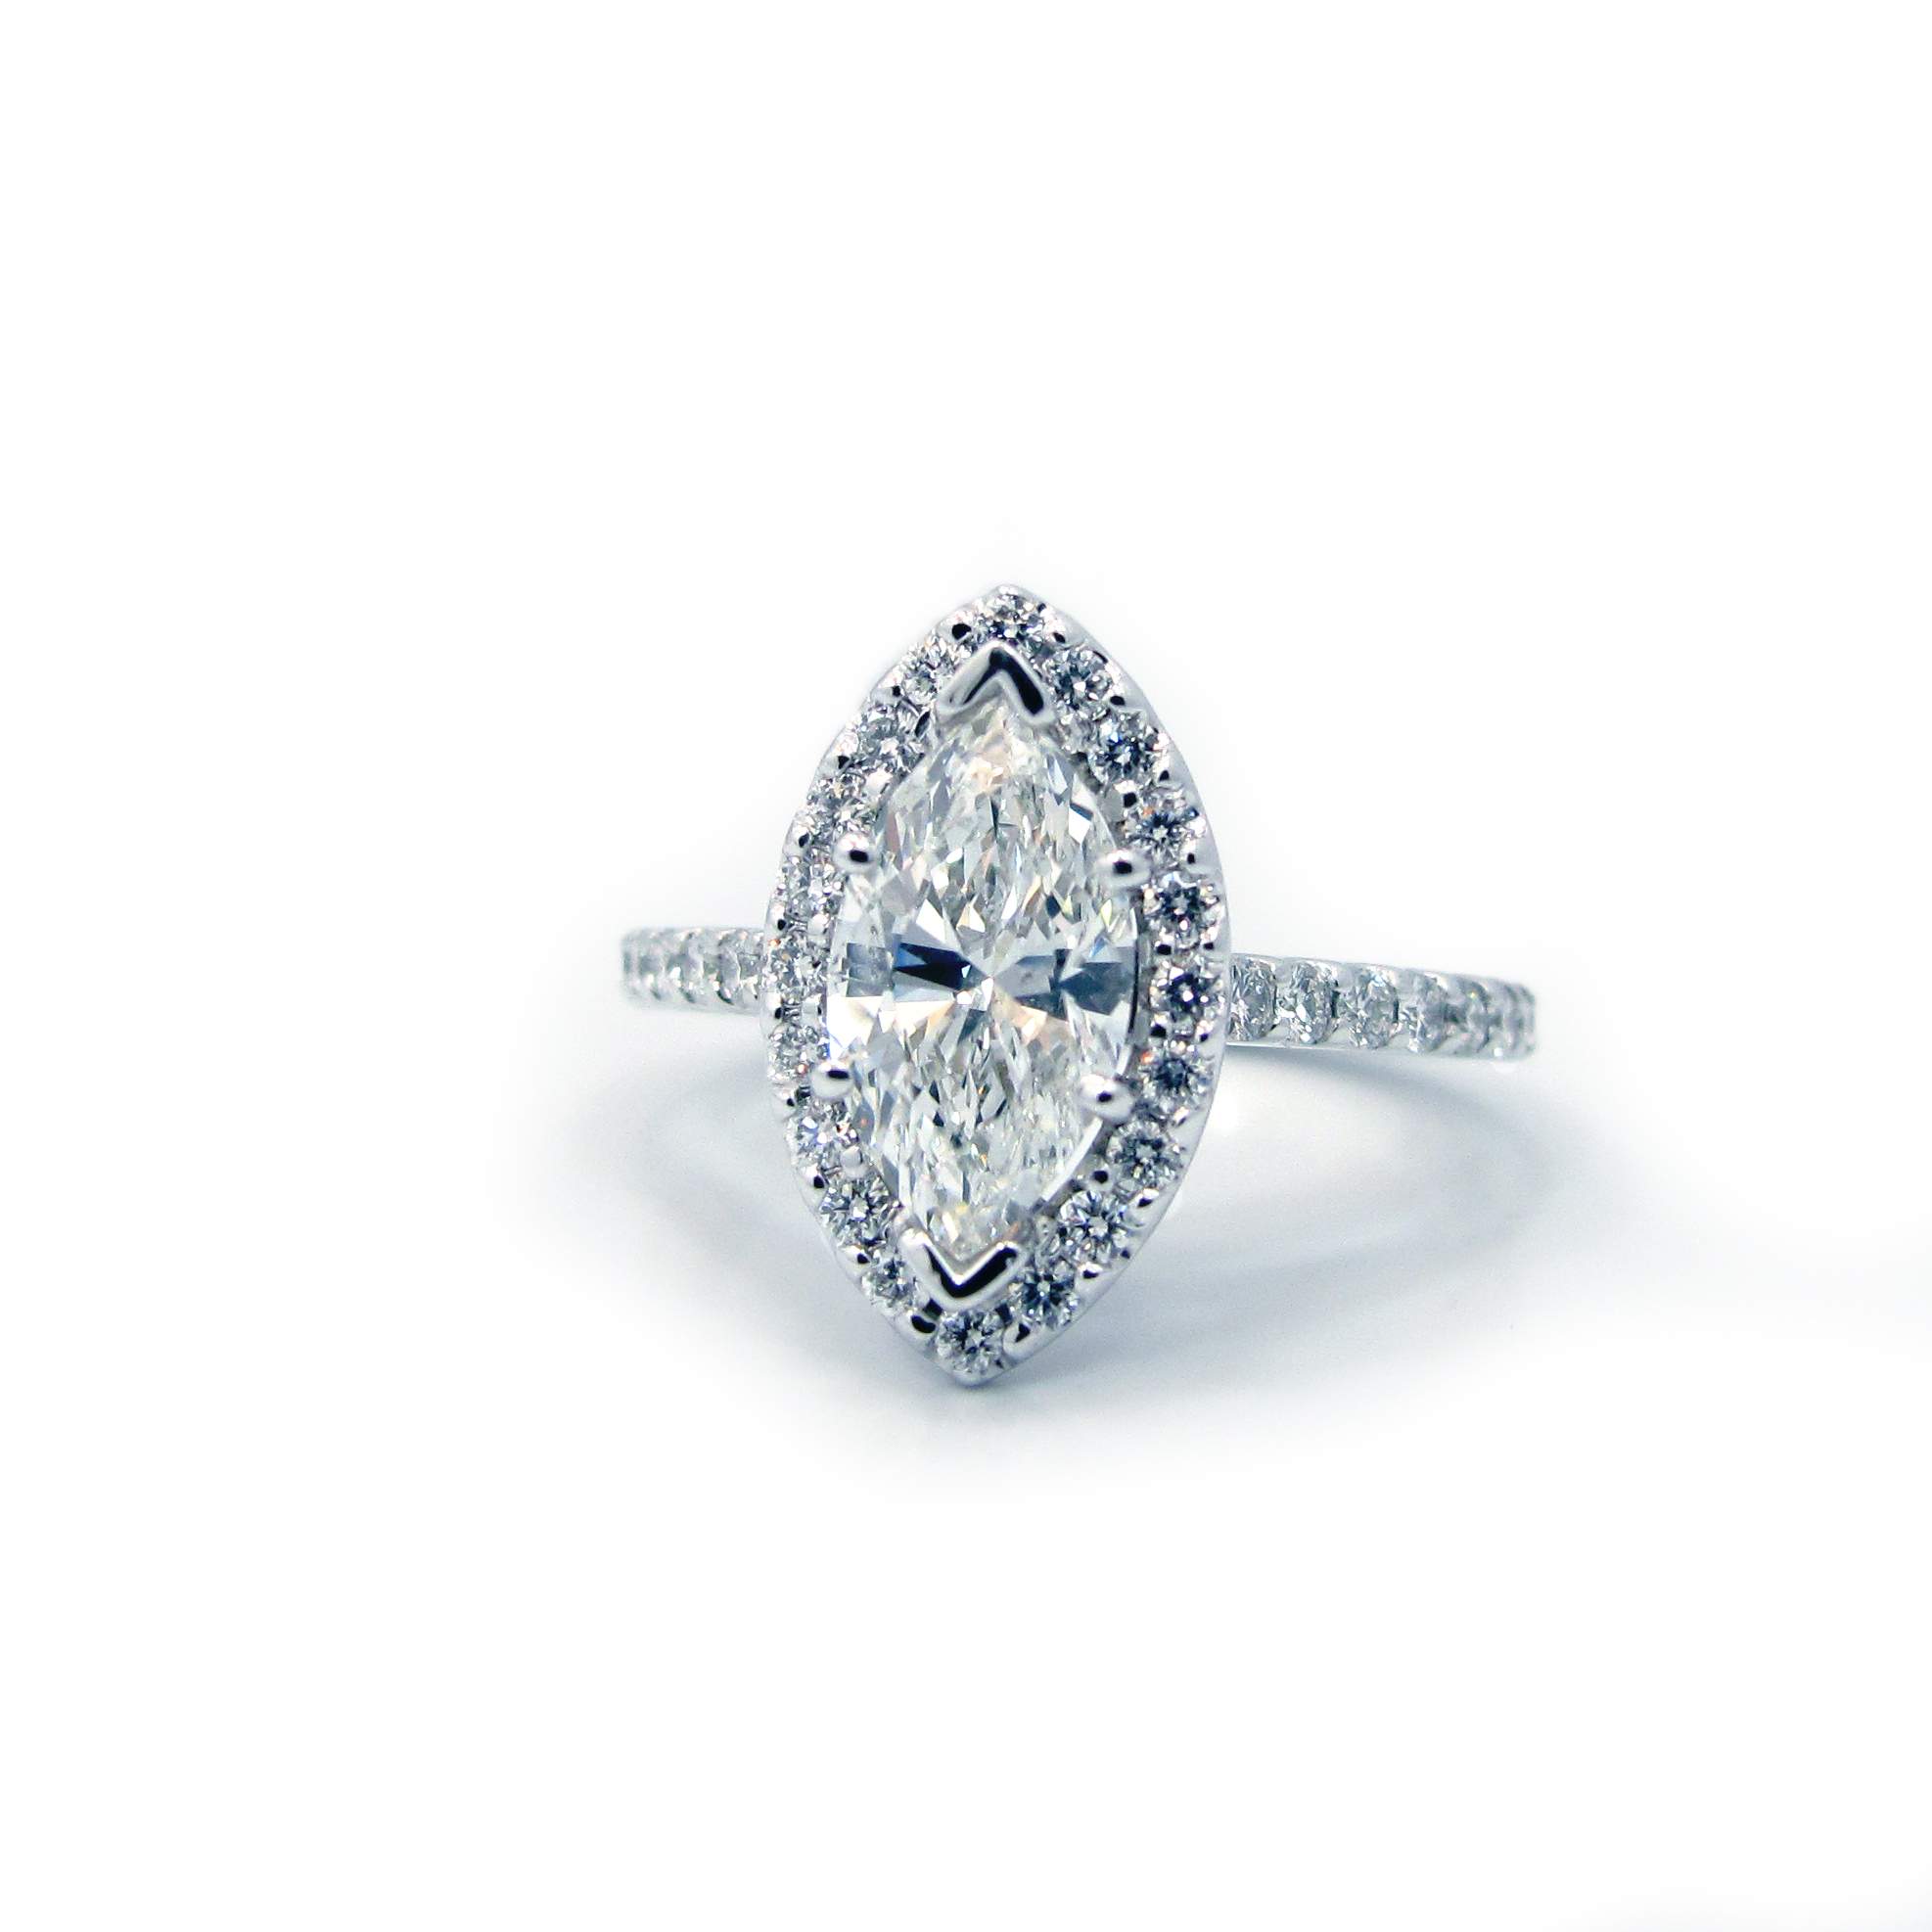 This is a picture of Marquise Diamond Halo Engagement ring